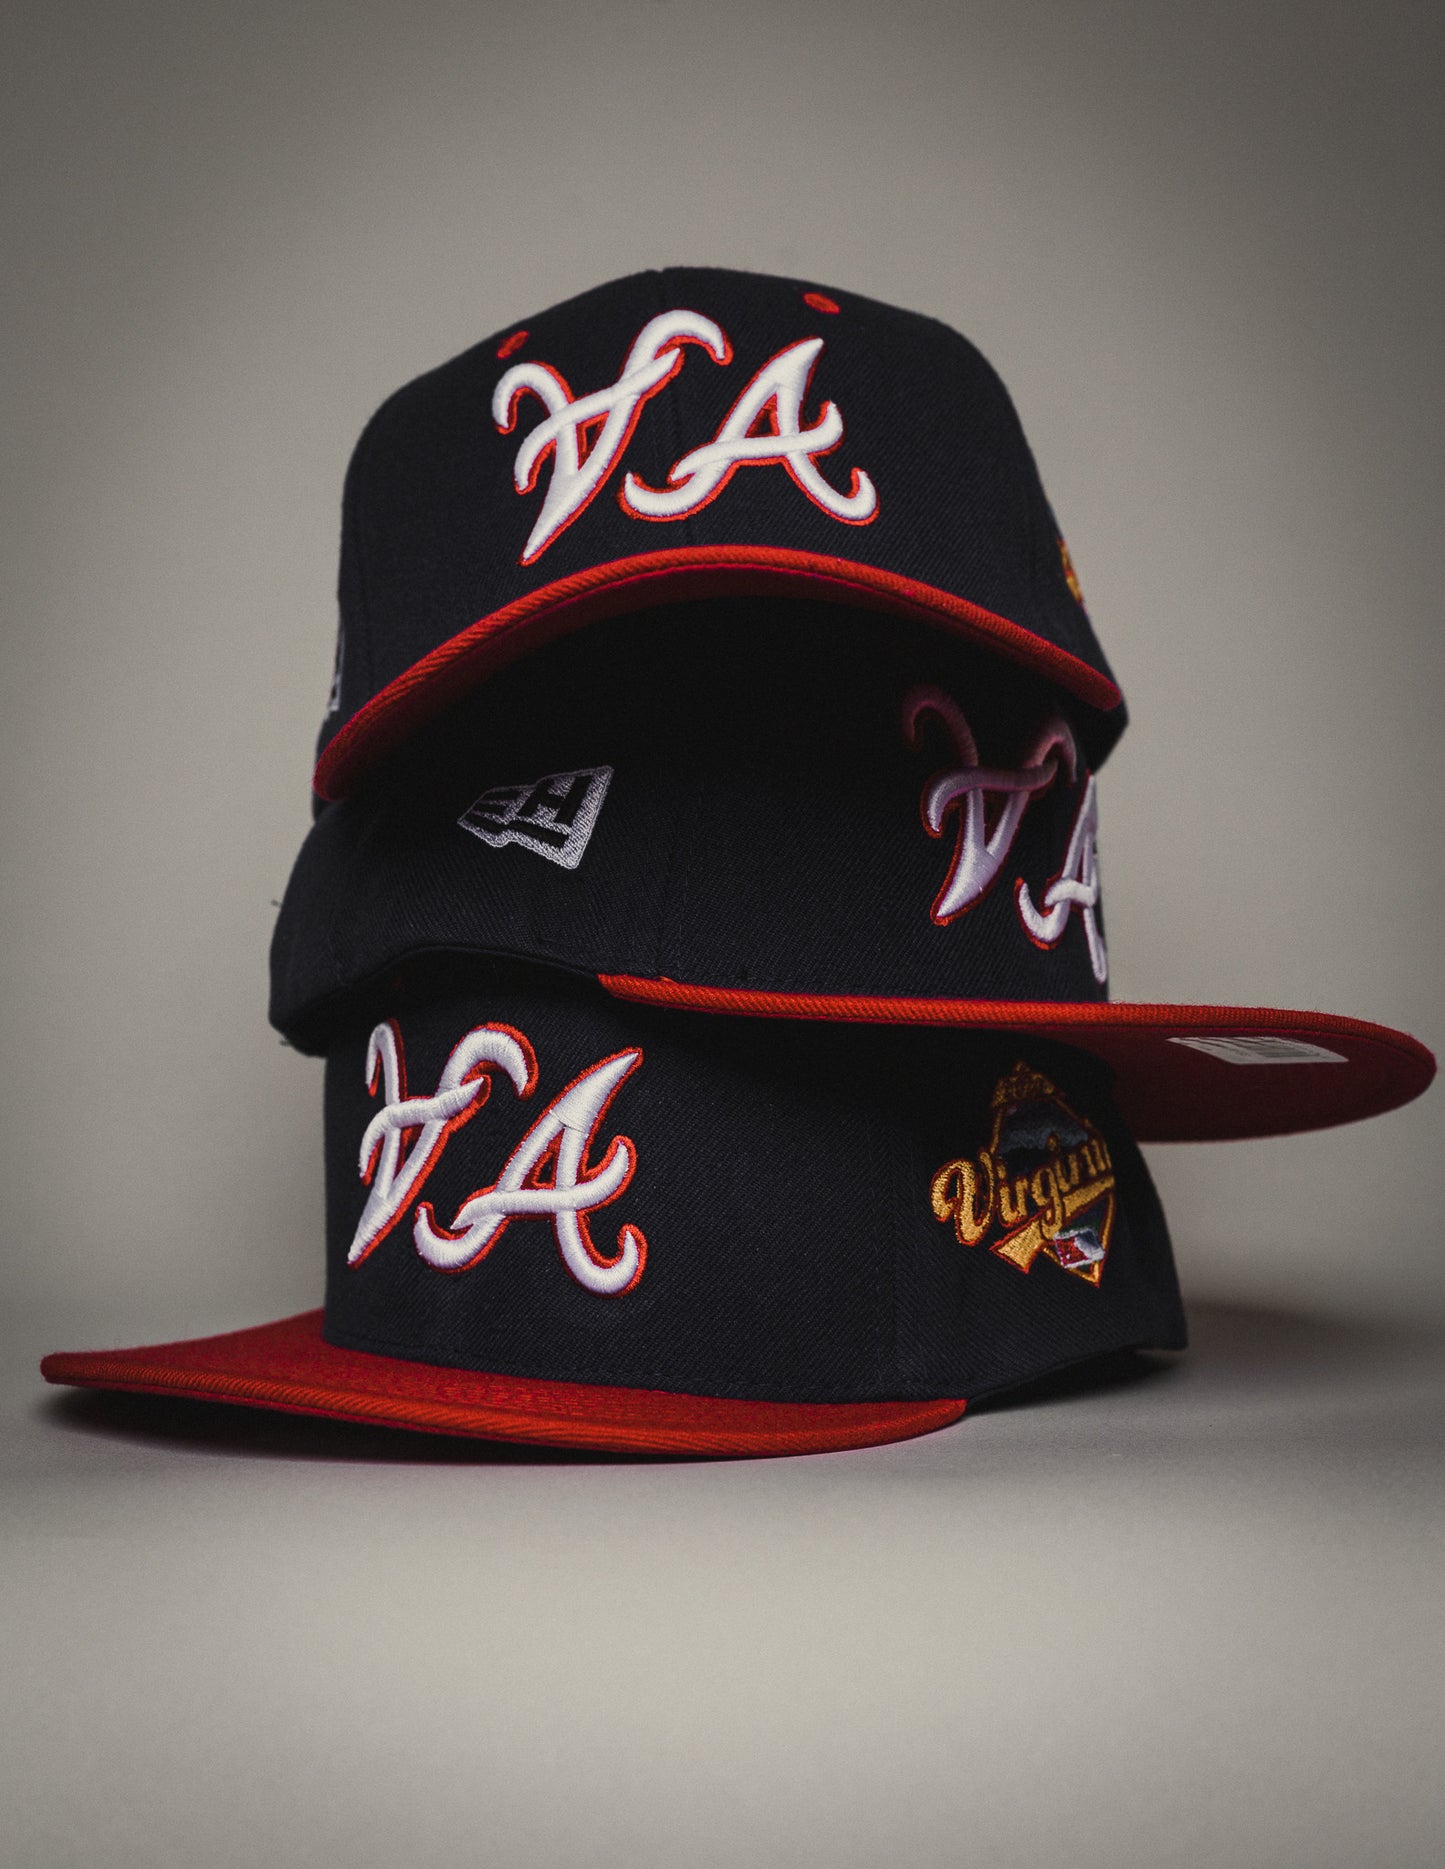 “To Virginia With Love” Snapback